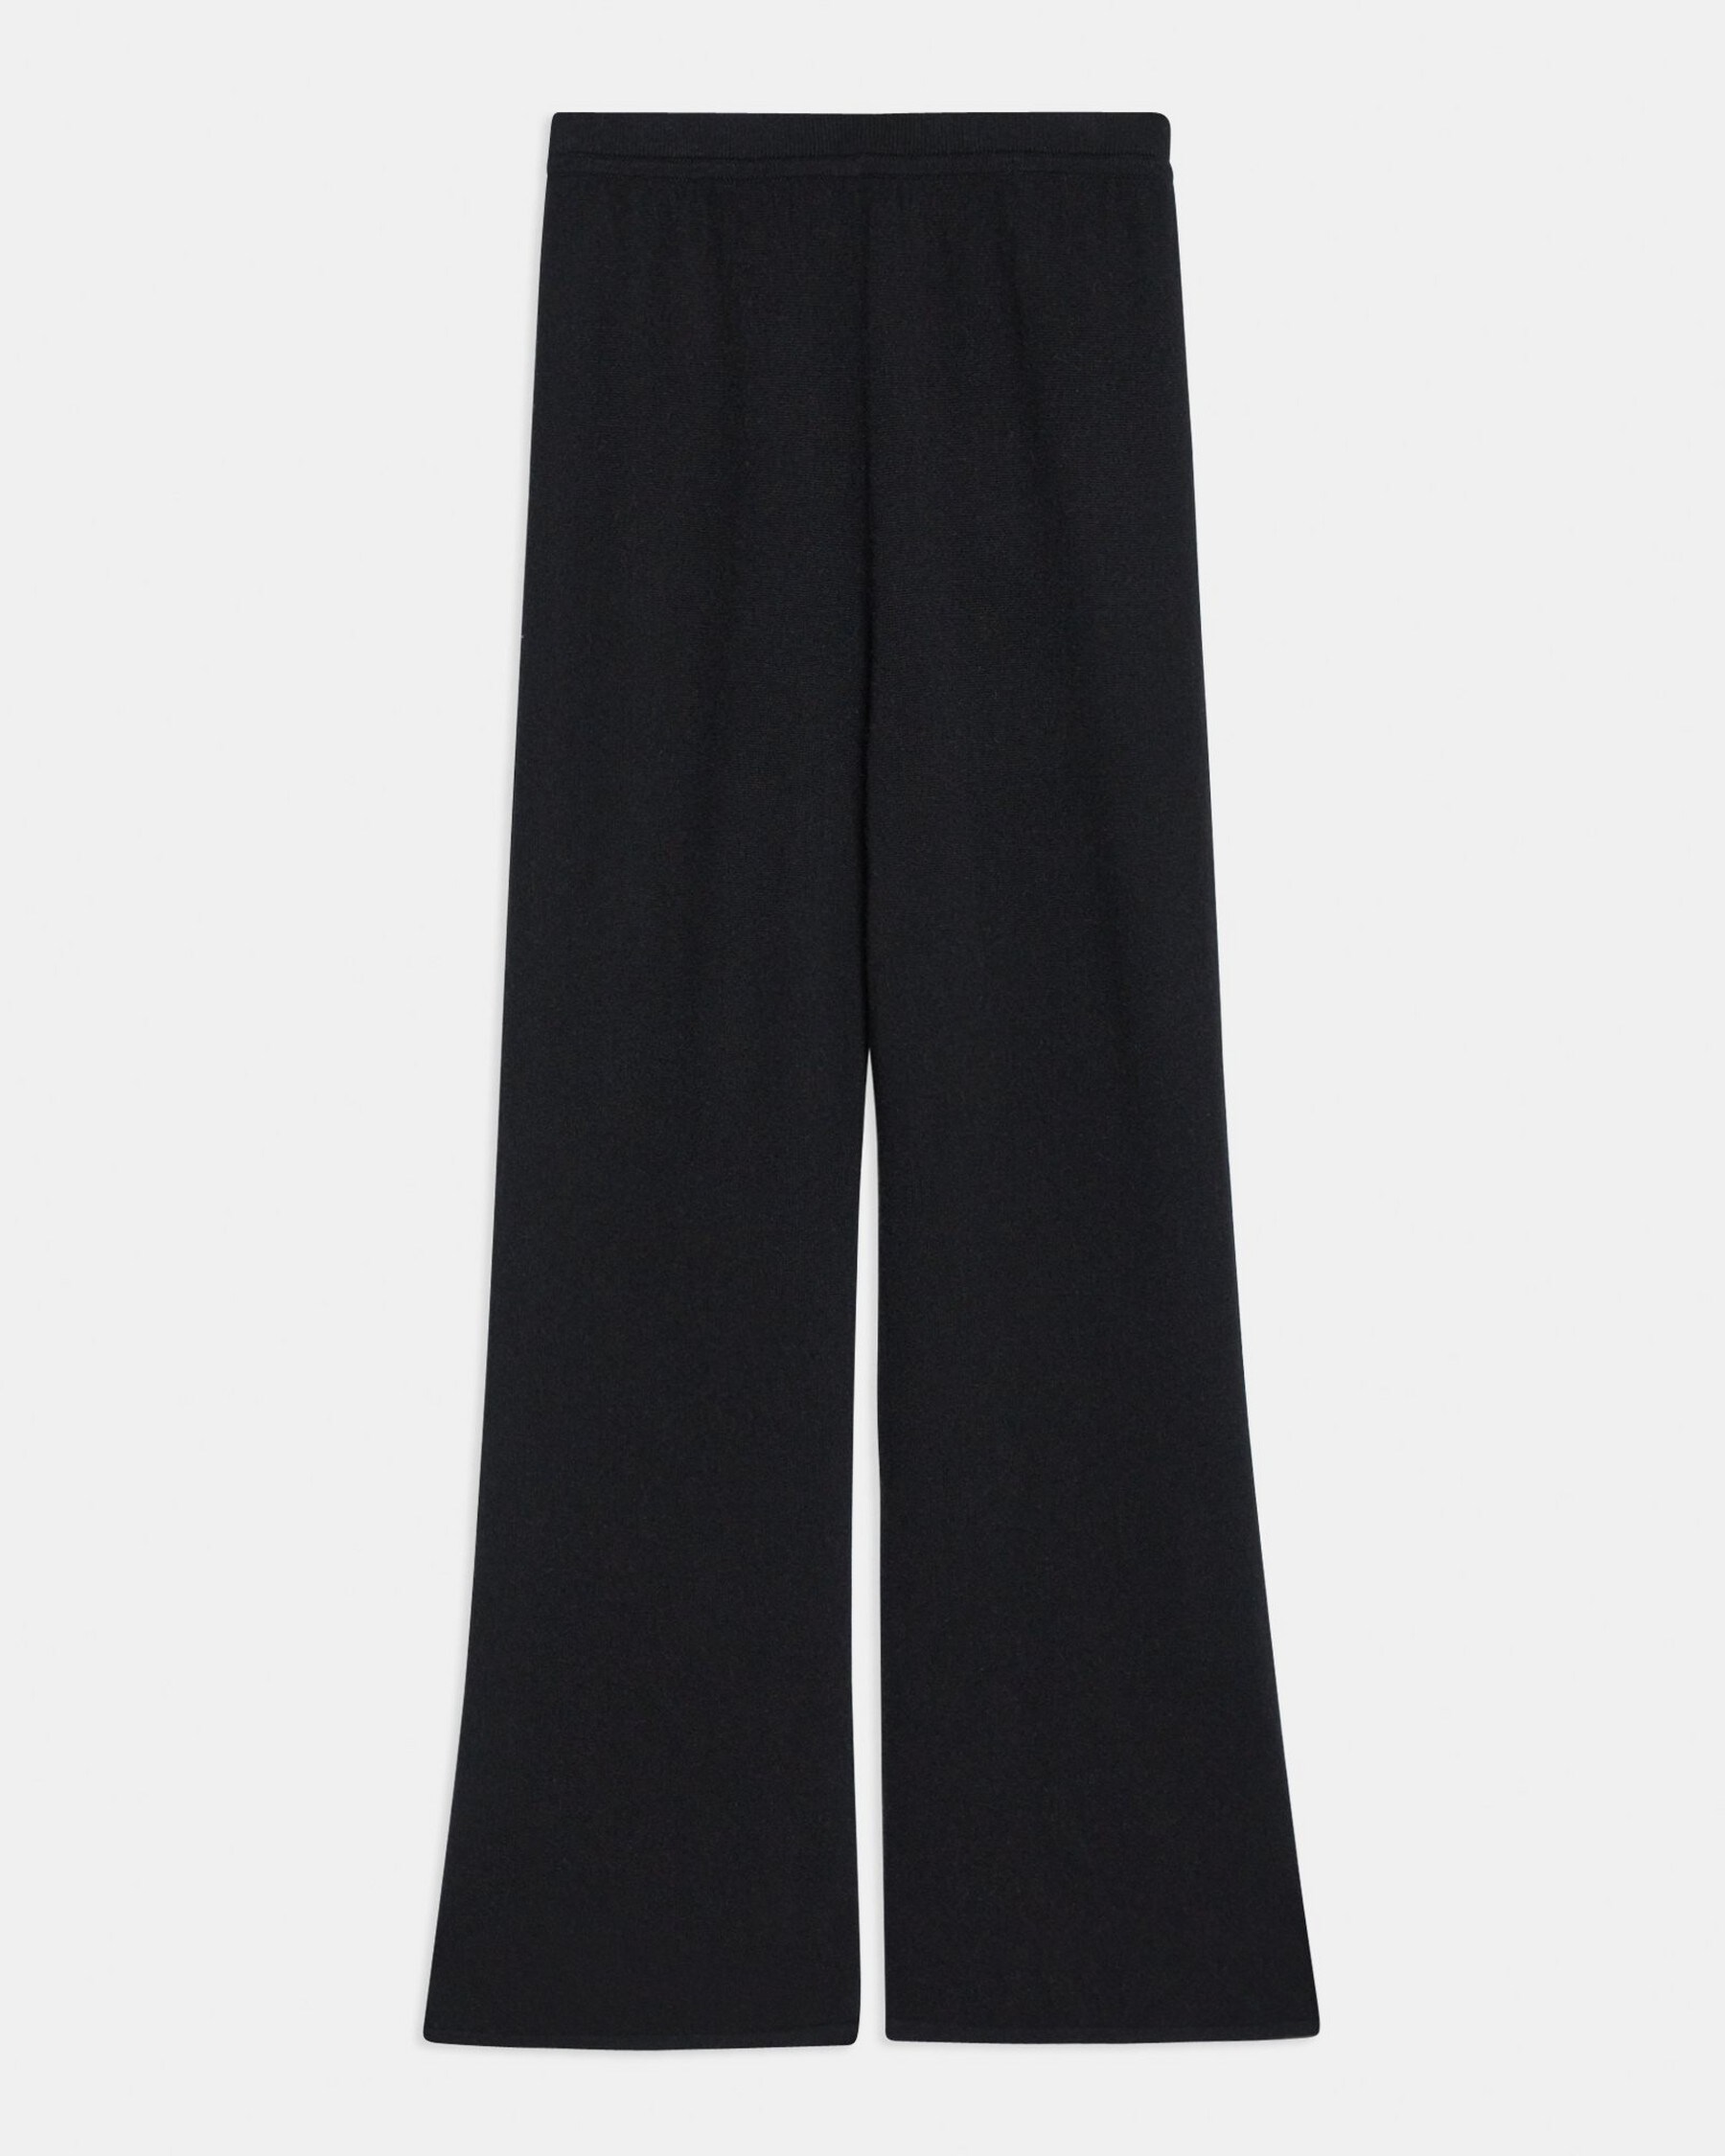 WIDE FLARE PANT